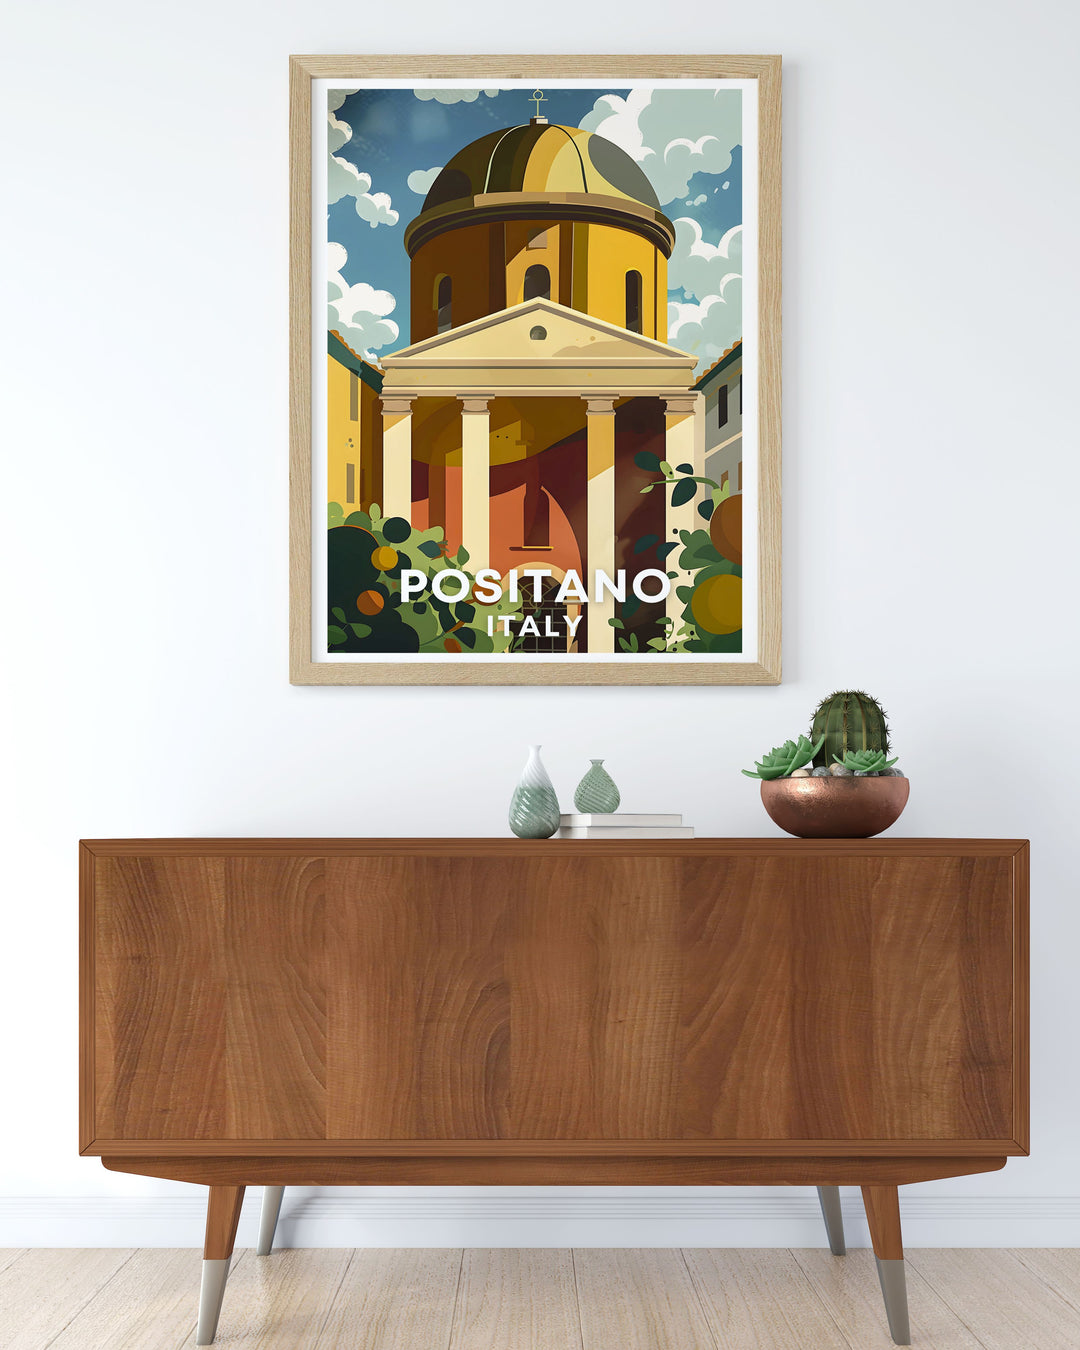 Amalfi Coast print featuring The Chiesa di Santa Maria Assunta in Positano adding a vibrant and elegant touch to your wall art collection capturing the essence of Italian architectural beauty and scenic coastal landscapes